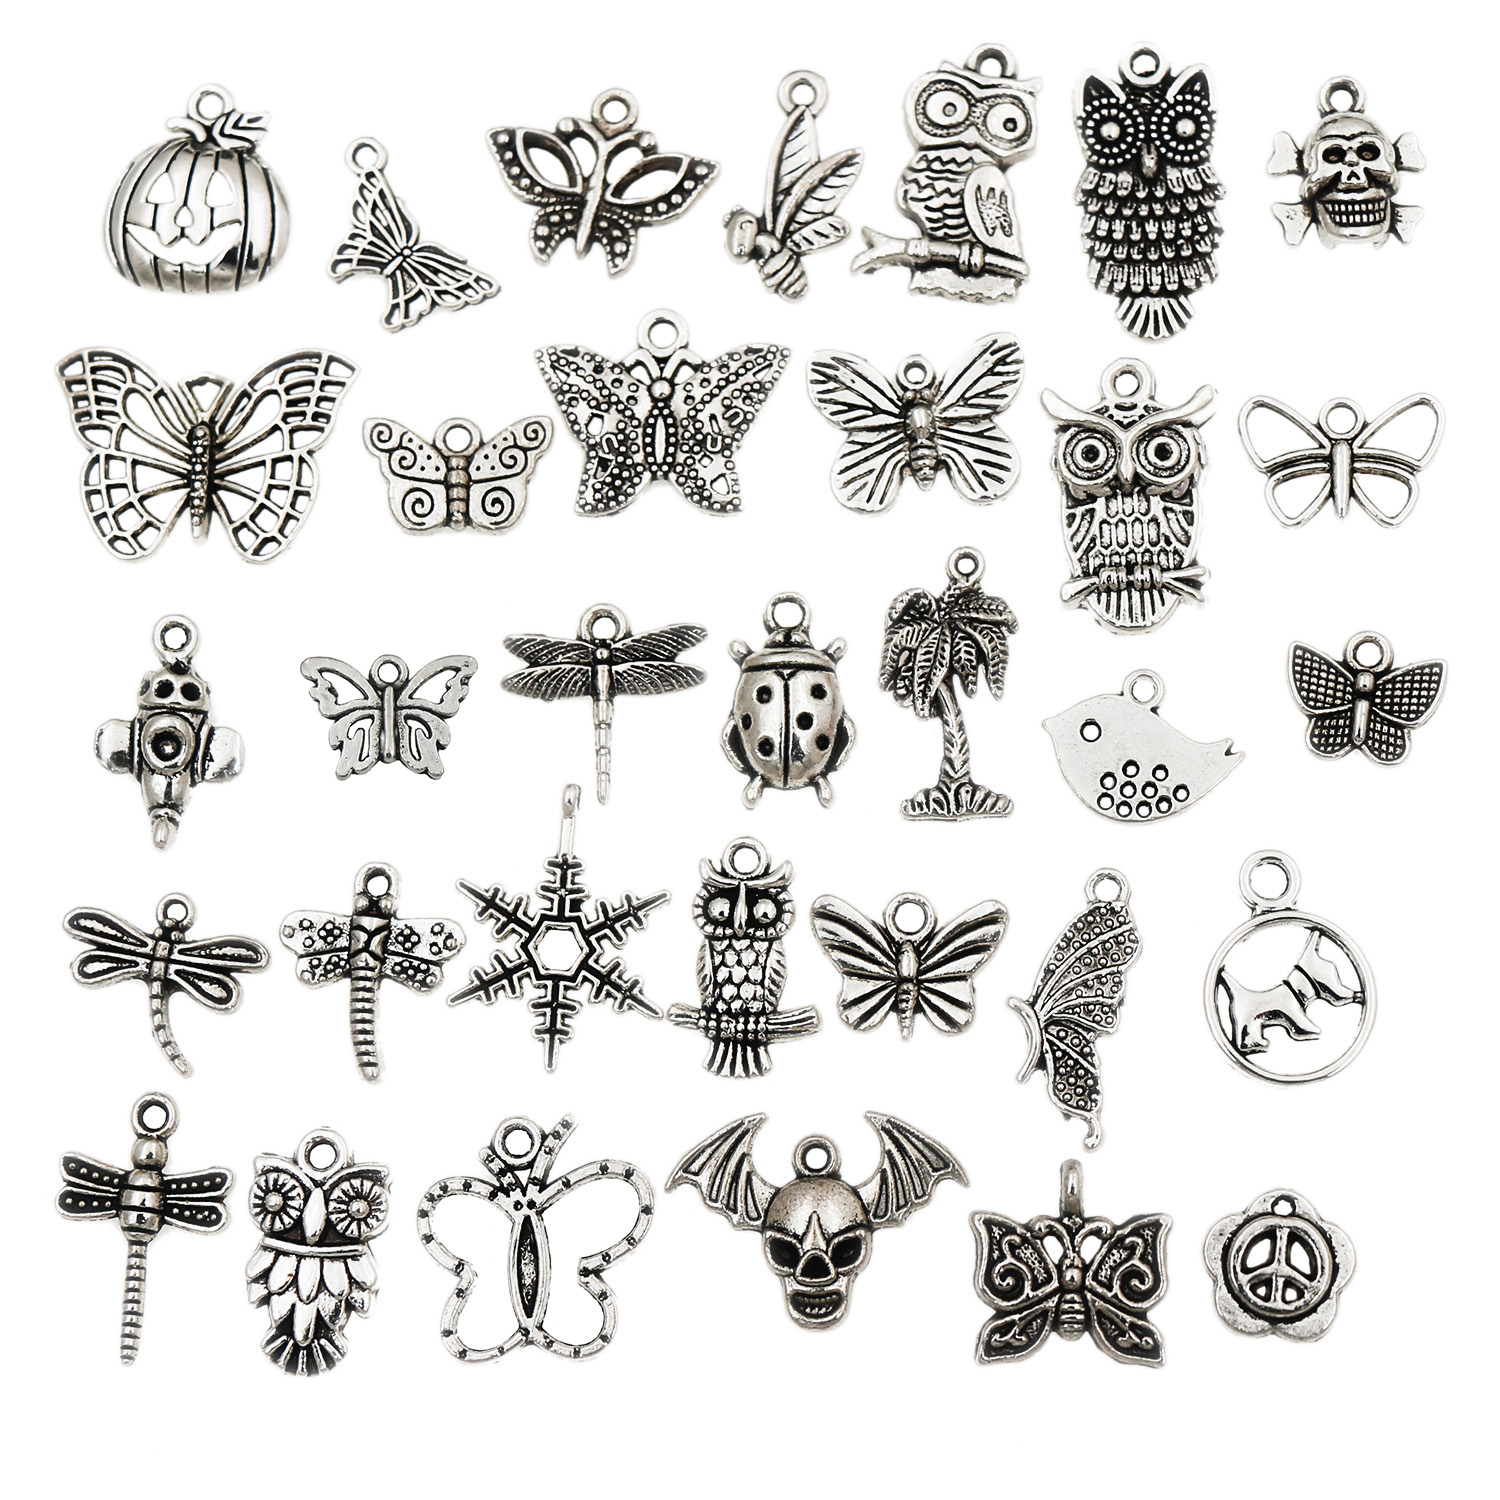 

Mixed Tibetan Silver Alloy Charms Pendant Butterfly Owl Bird Dragonfly Peace Flower Dog Skull Snowflake Ladybug For DIY Jewelry Making 150Pcs